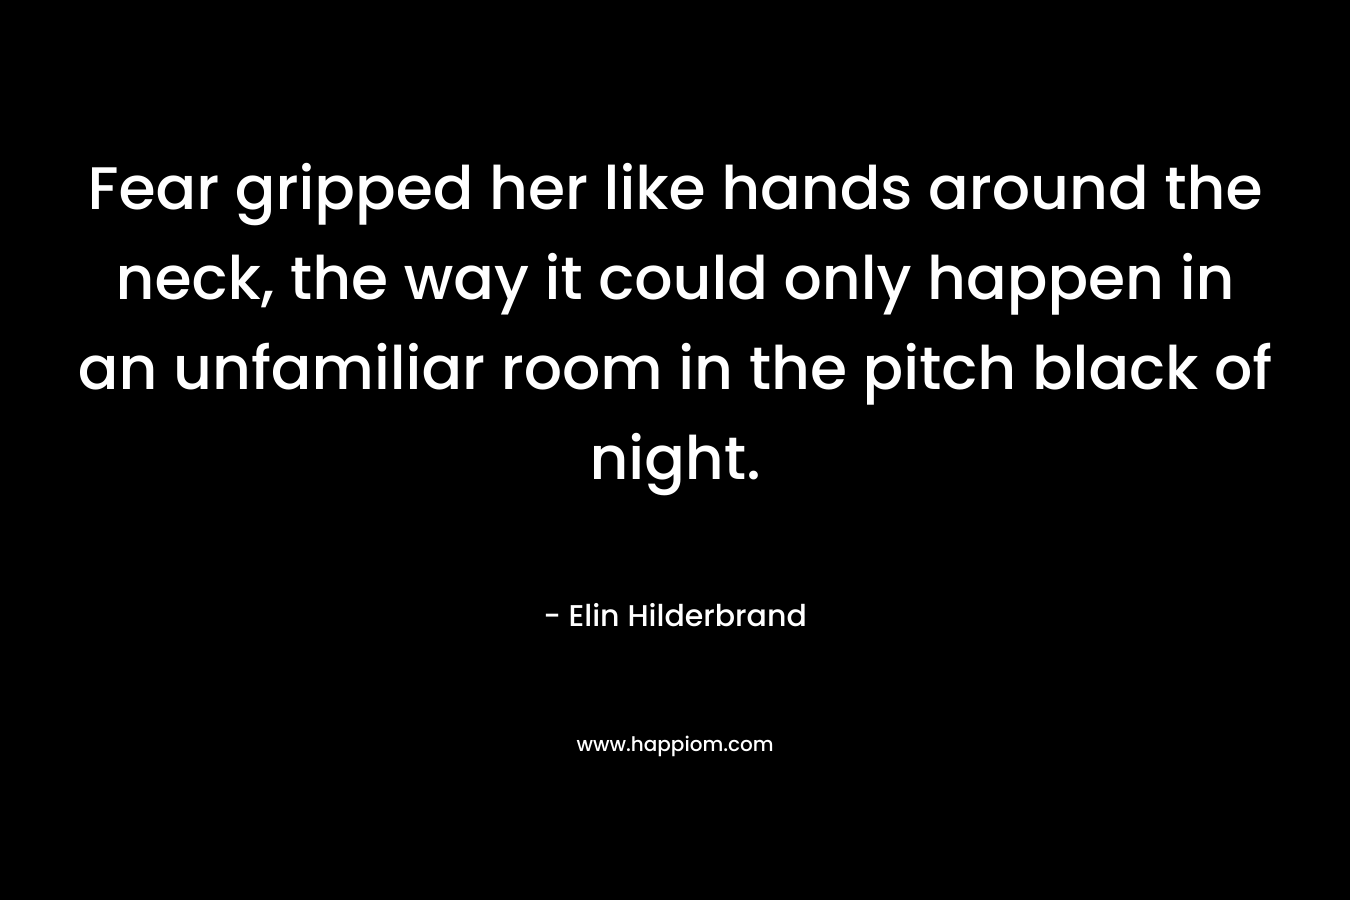 Fear gripped her like hands around the neck, the way it could only happen in an unfamiliar room in the pitch black of night. – Elin Hilderbrand